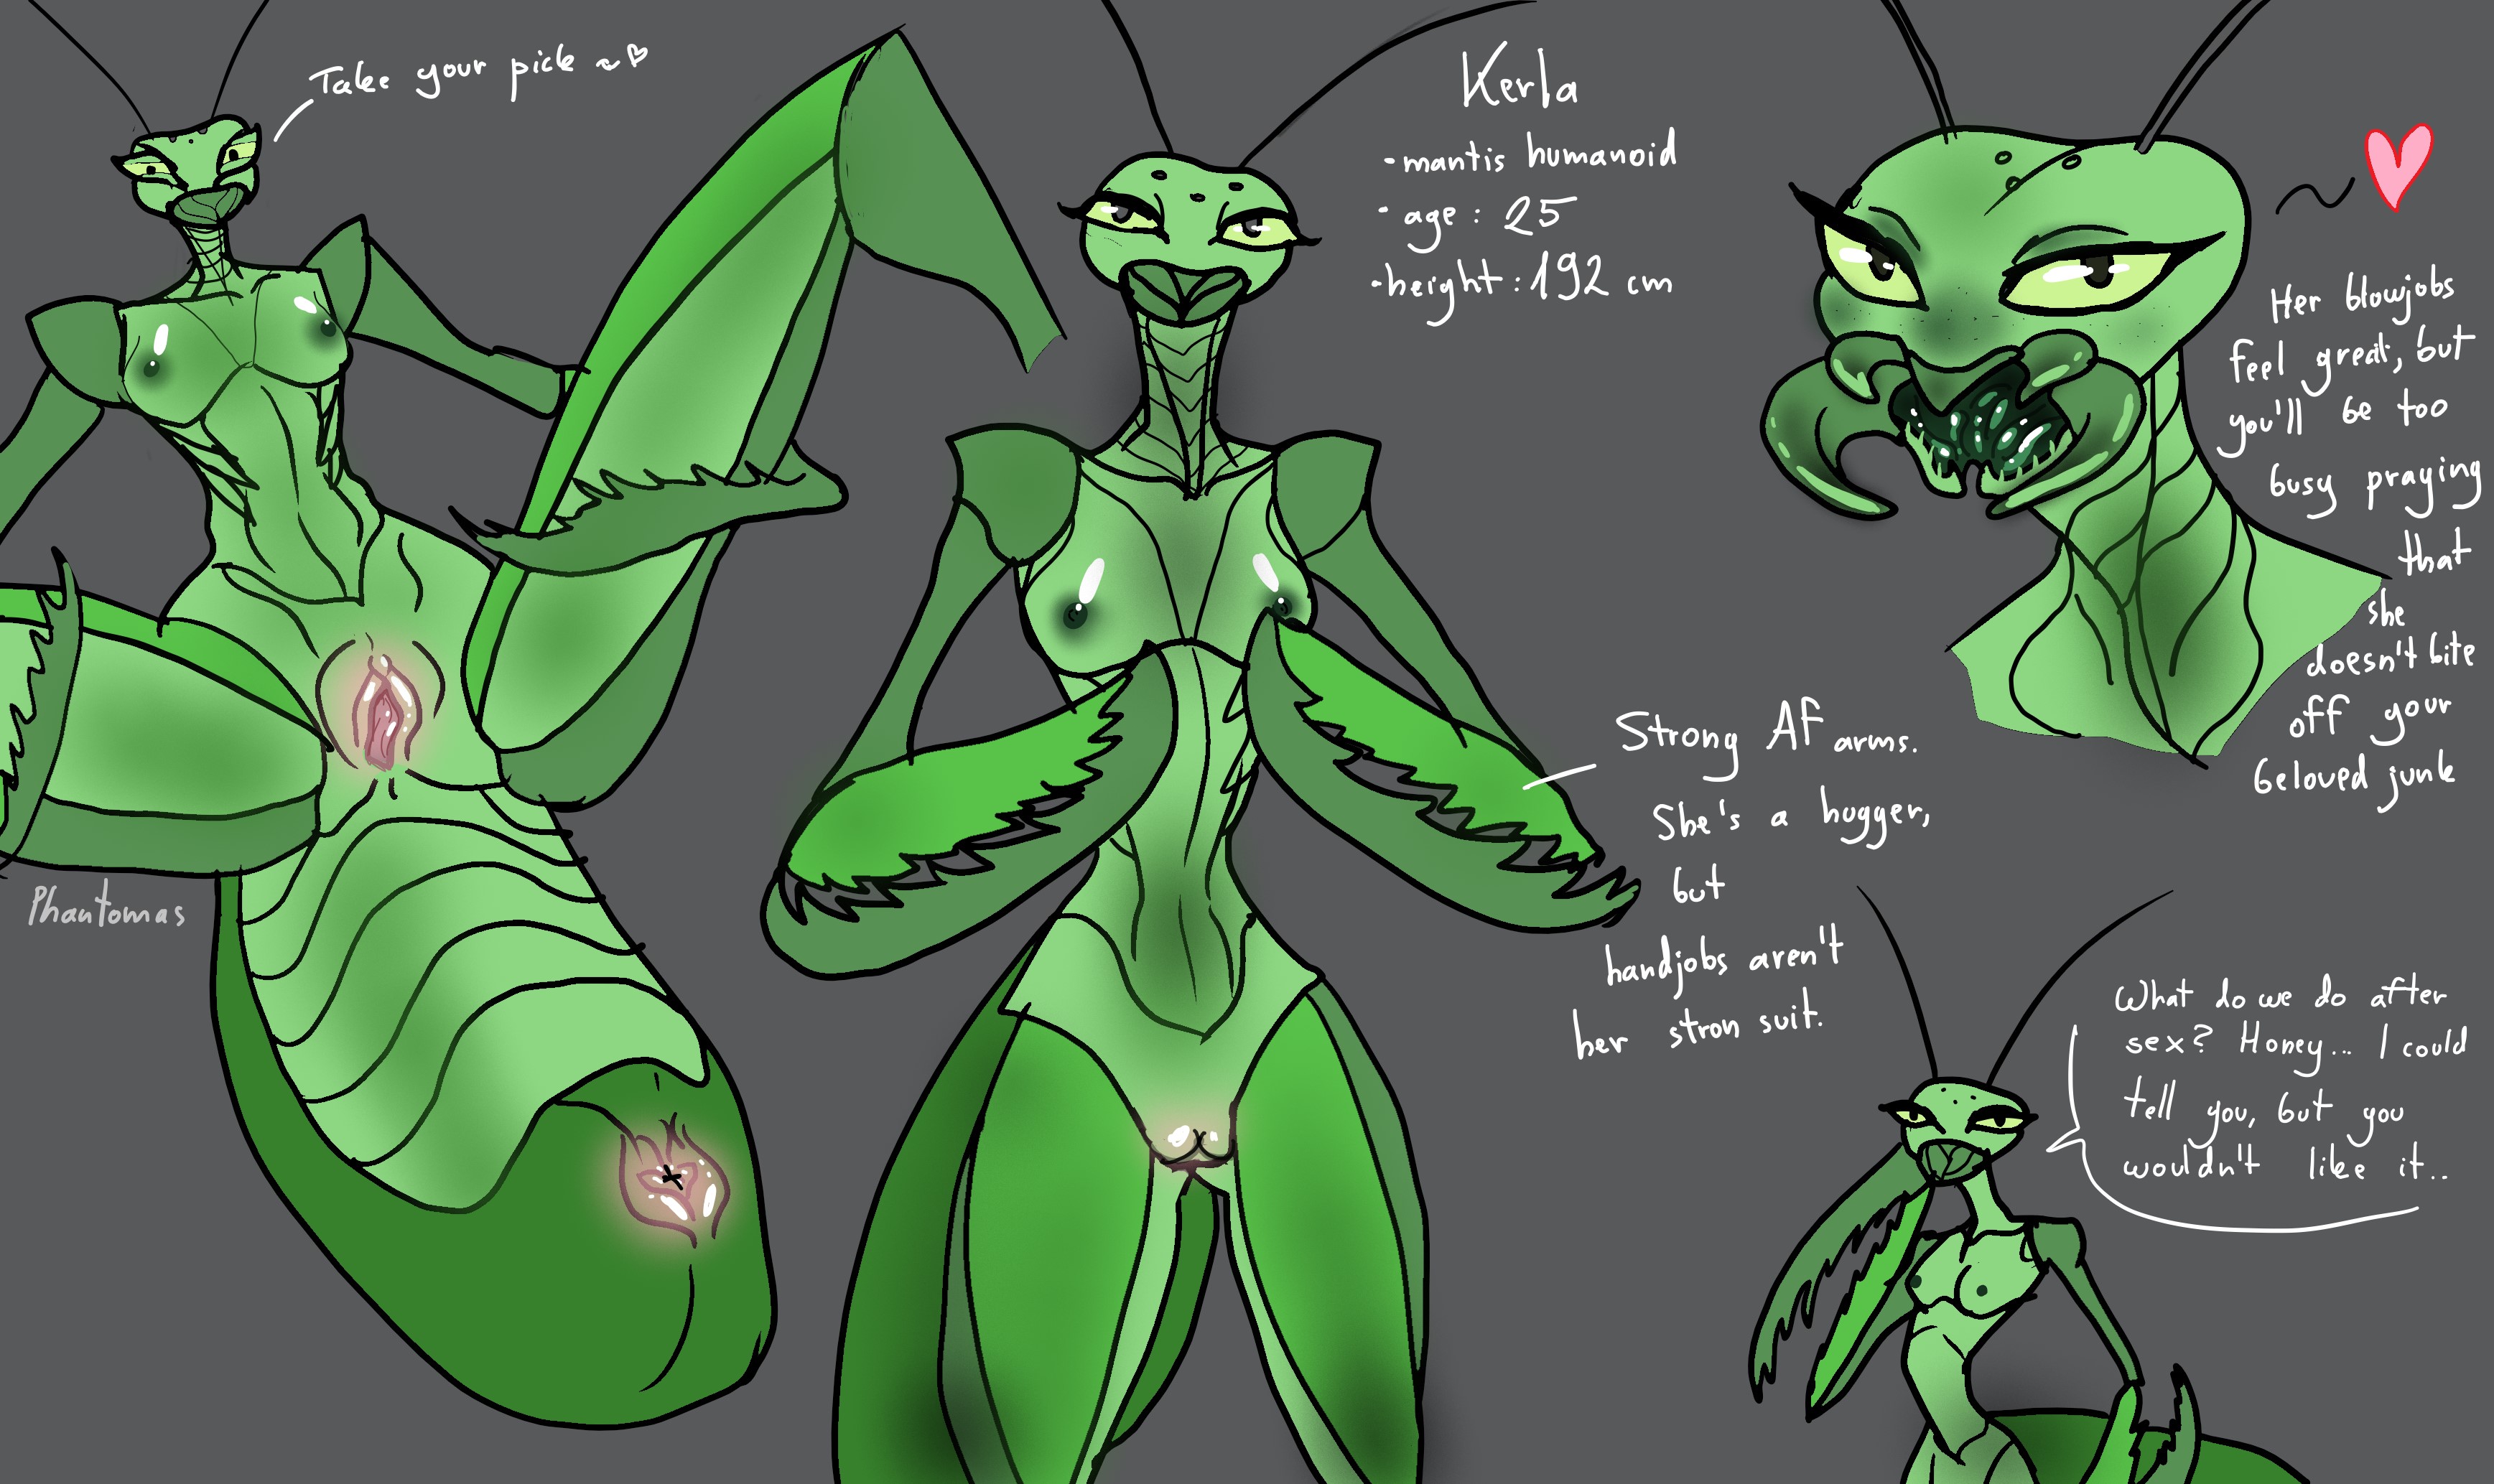 antennae, anus, insect girl, insect humanoid, insect mouth, mantis girl, ph...